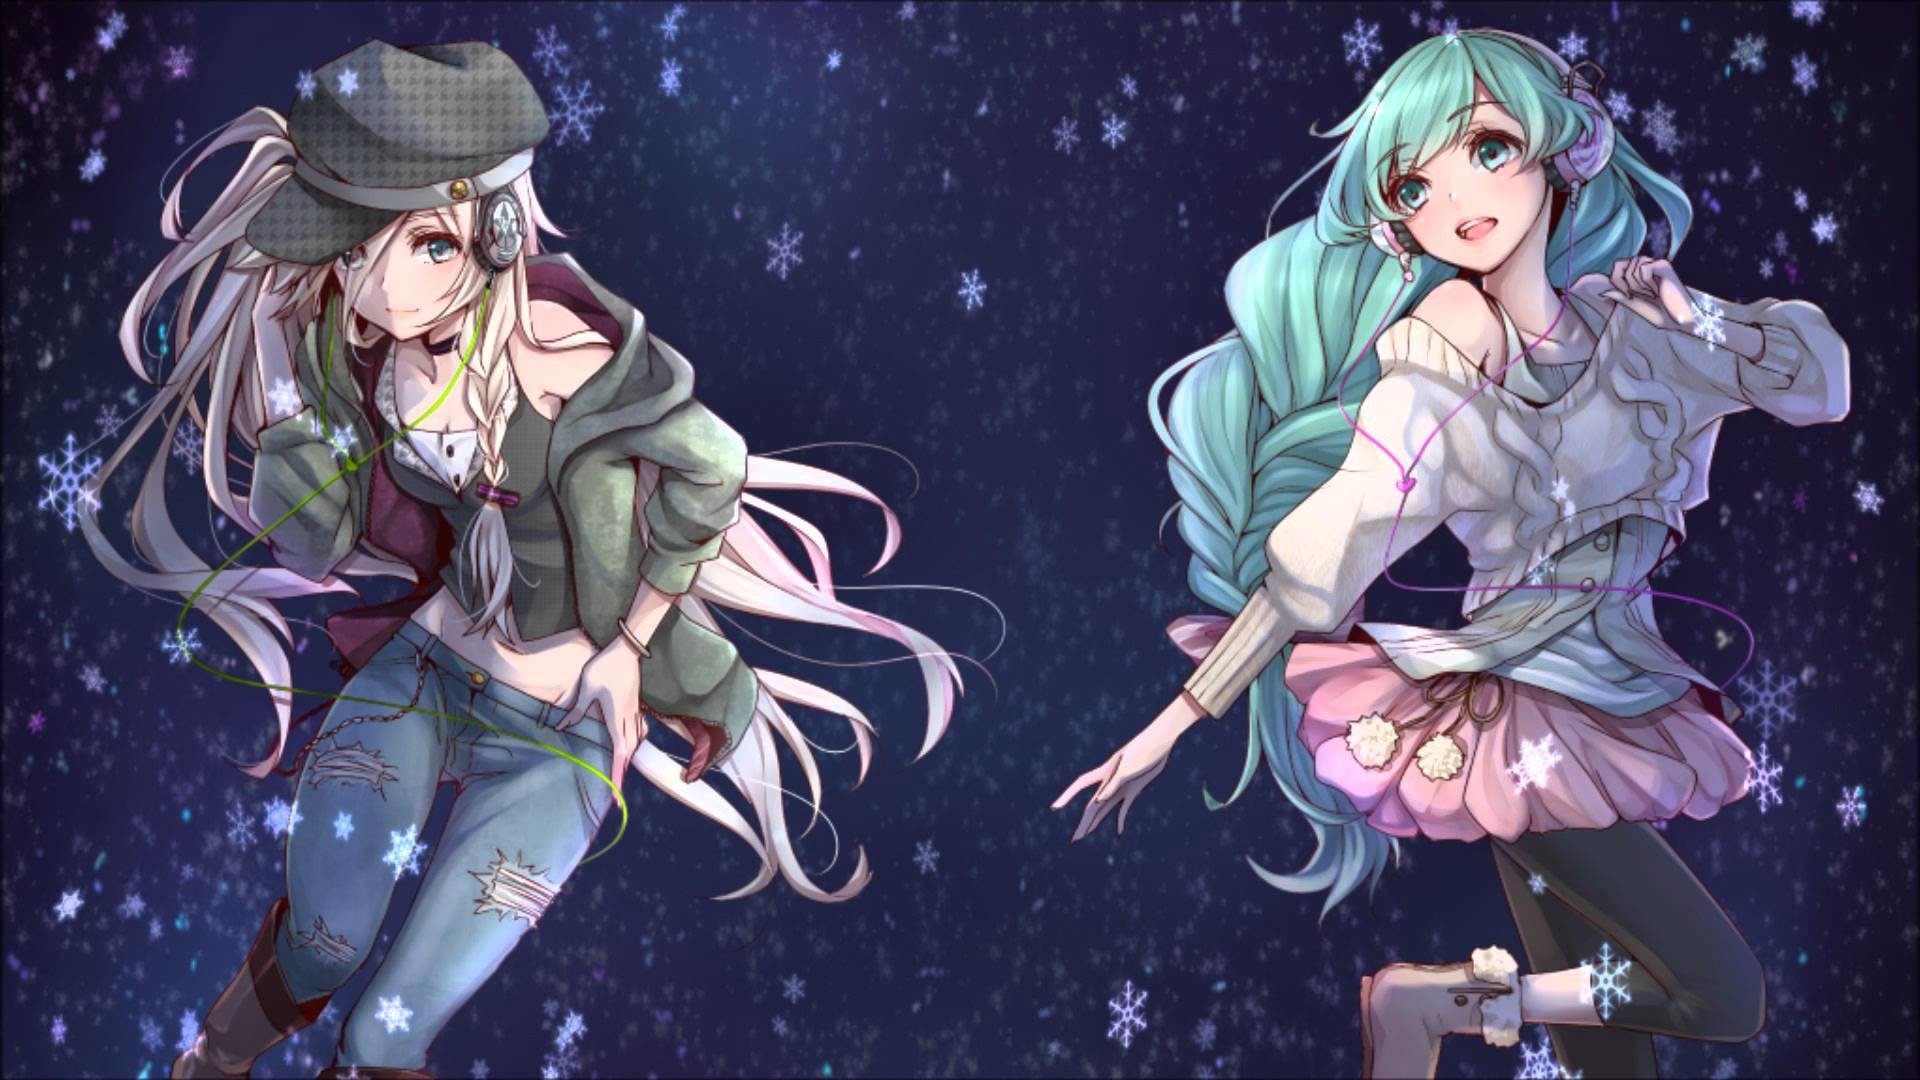 1920x1080 Vocaloids images IA and Miku HD wallpaper and background photos